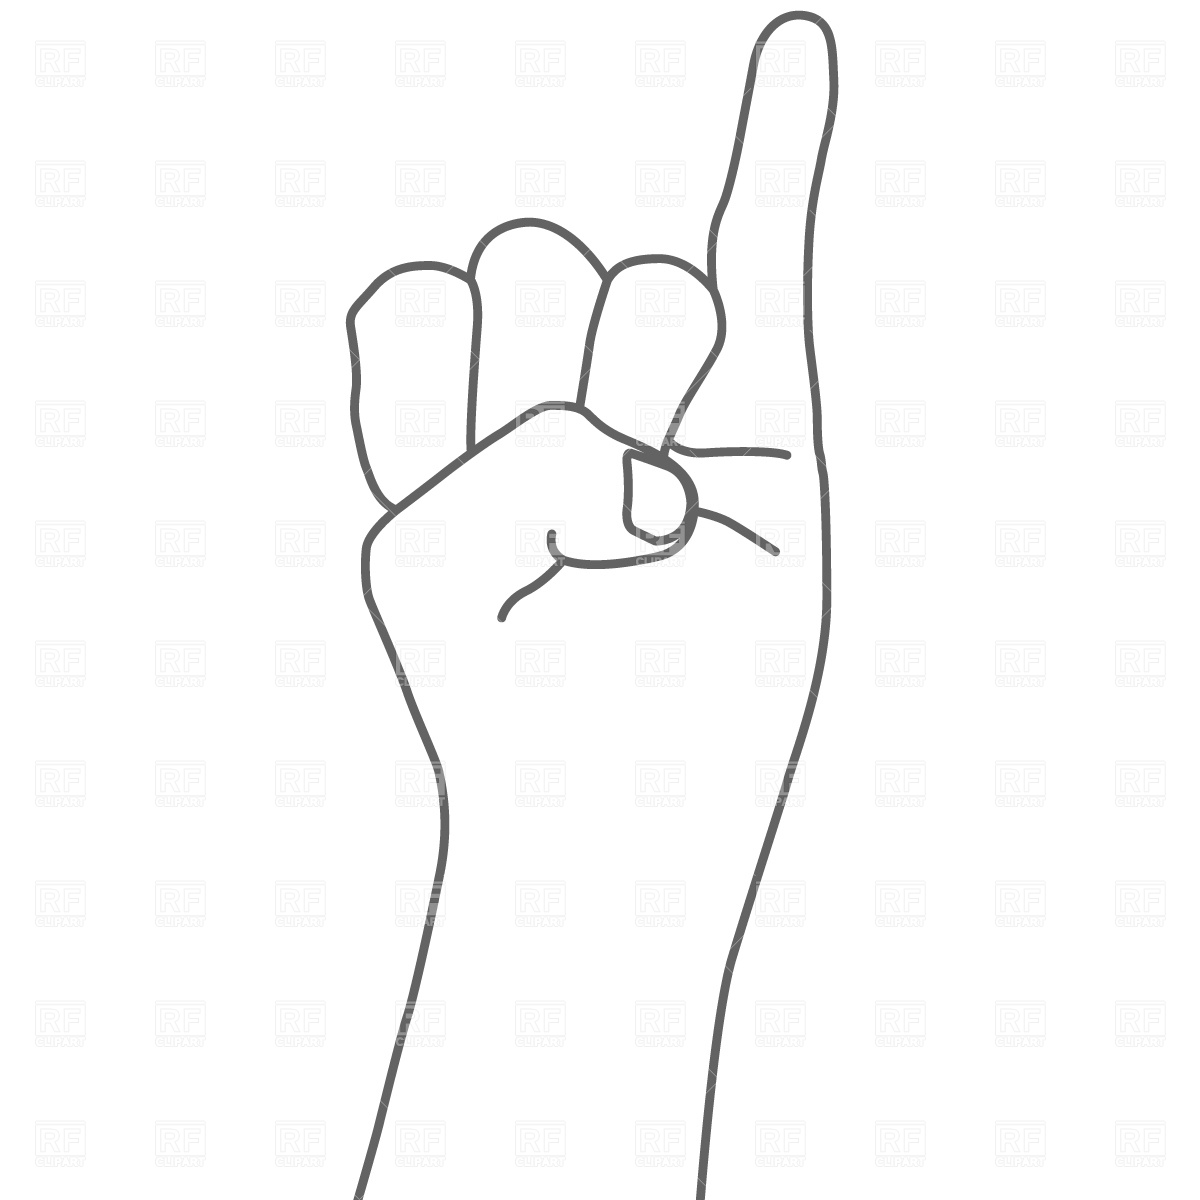 The Little Finger Sign Download Royalty Free Vector Clipart  Eps